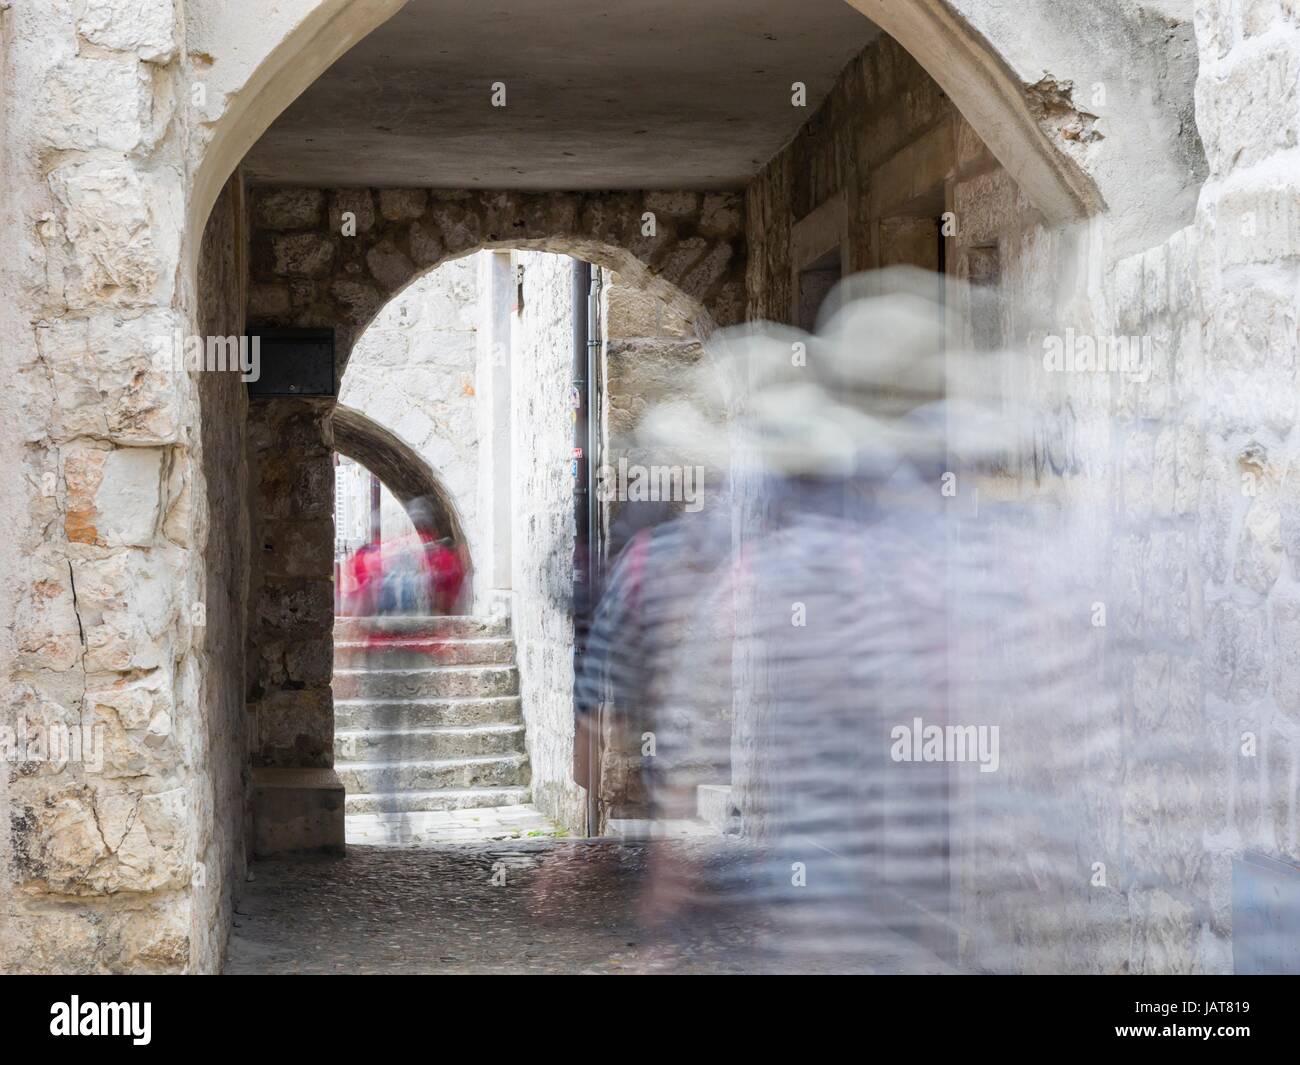 Dubrovnik in Croatia blurry people passing by ghosts ghost ghosted image Stock Photo